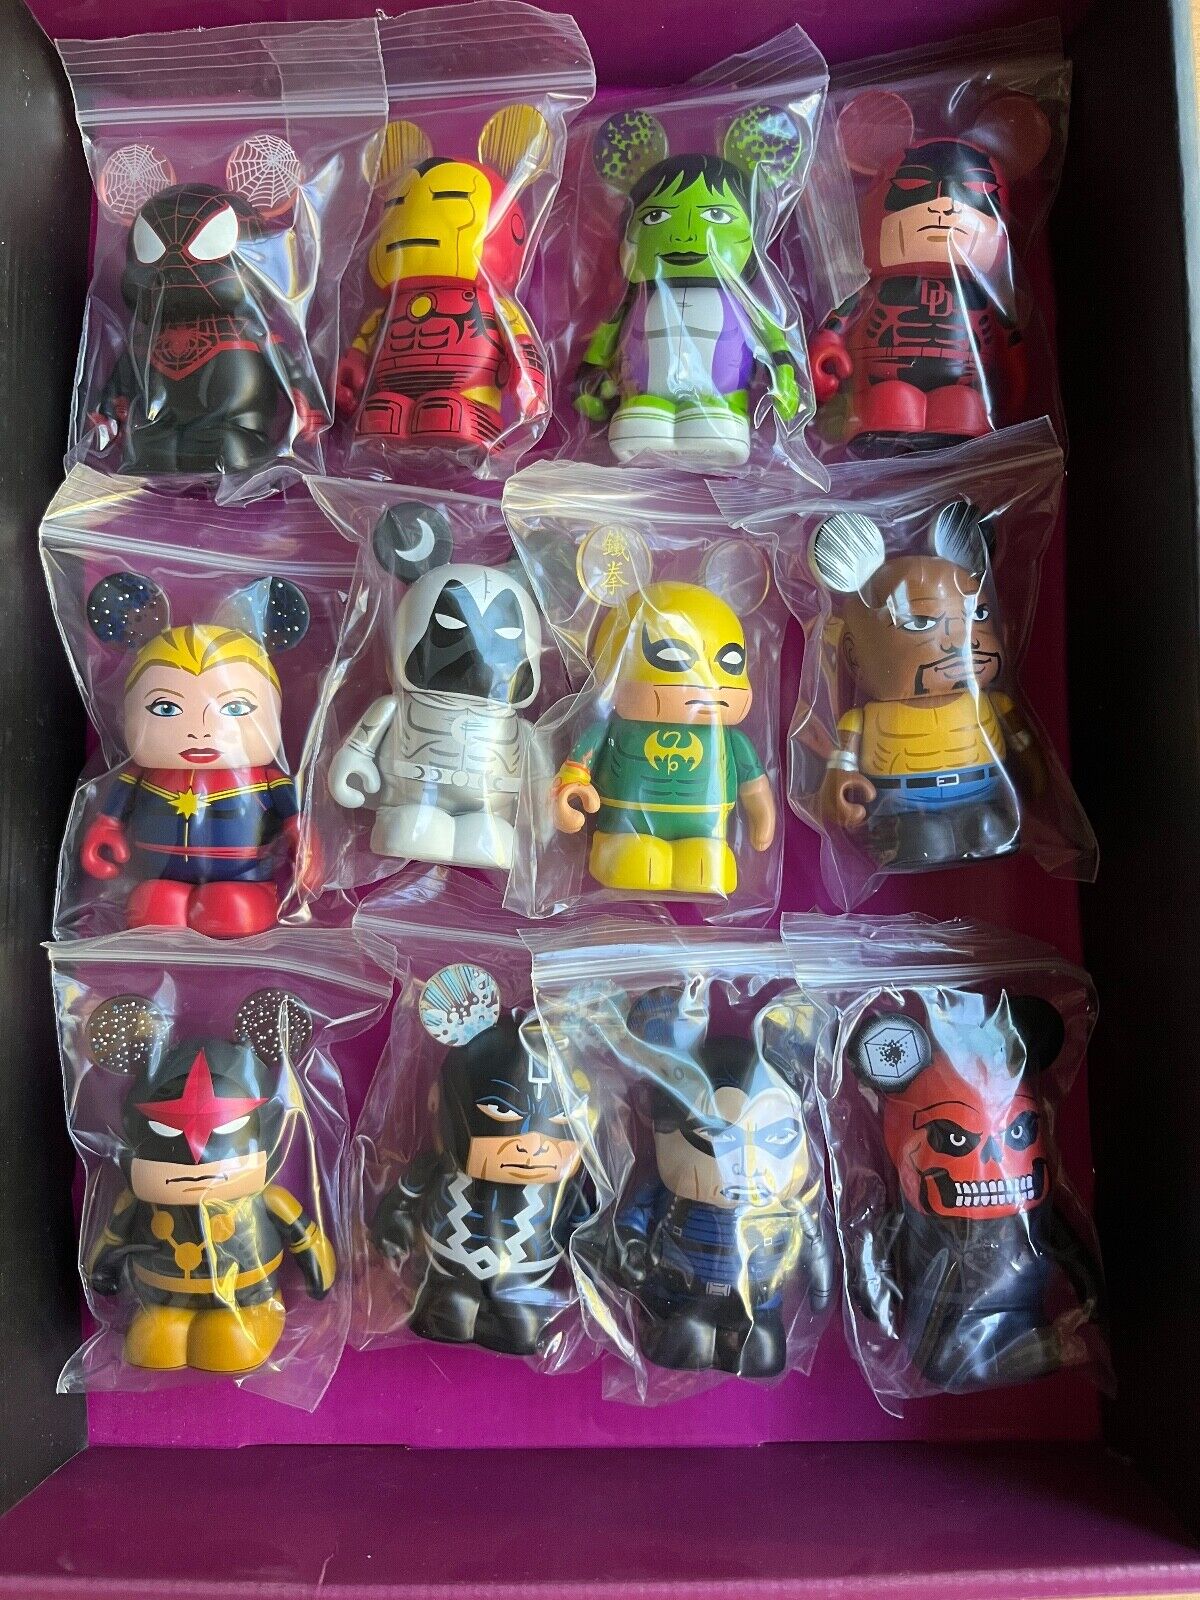 Disney Vinylmation Marvel 3 - Complete Set of 12 with Chaser